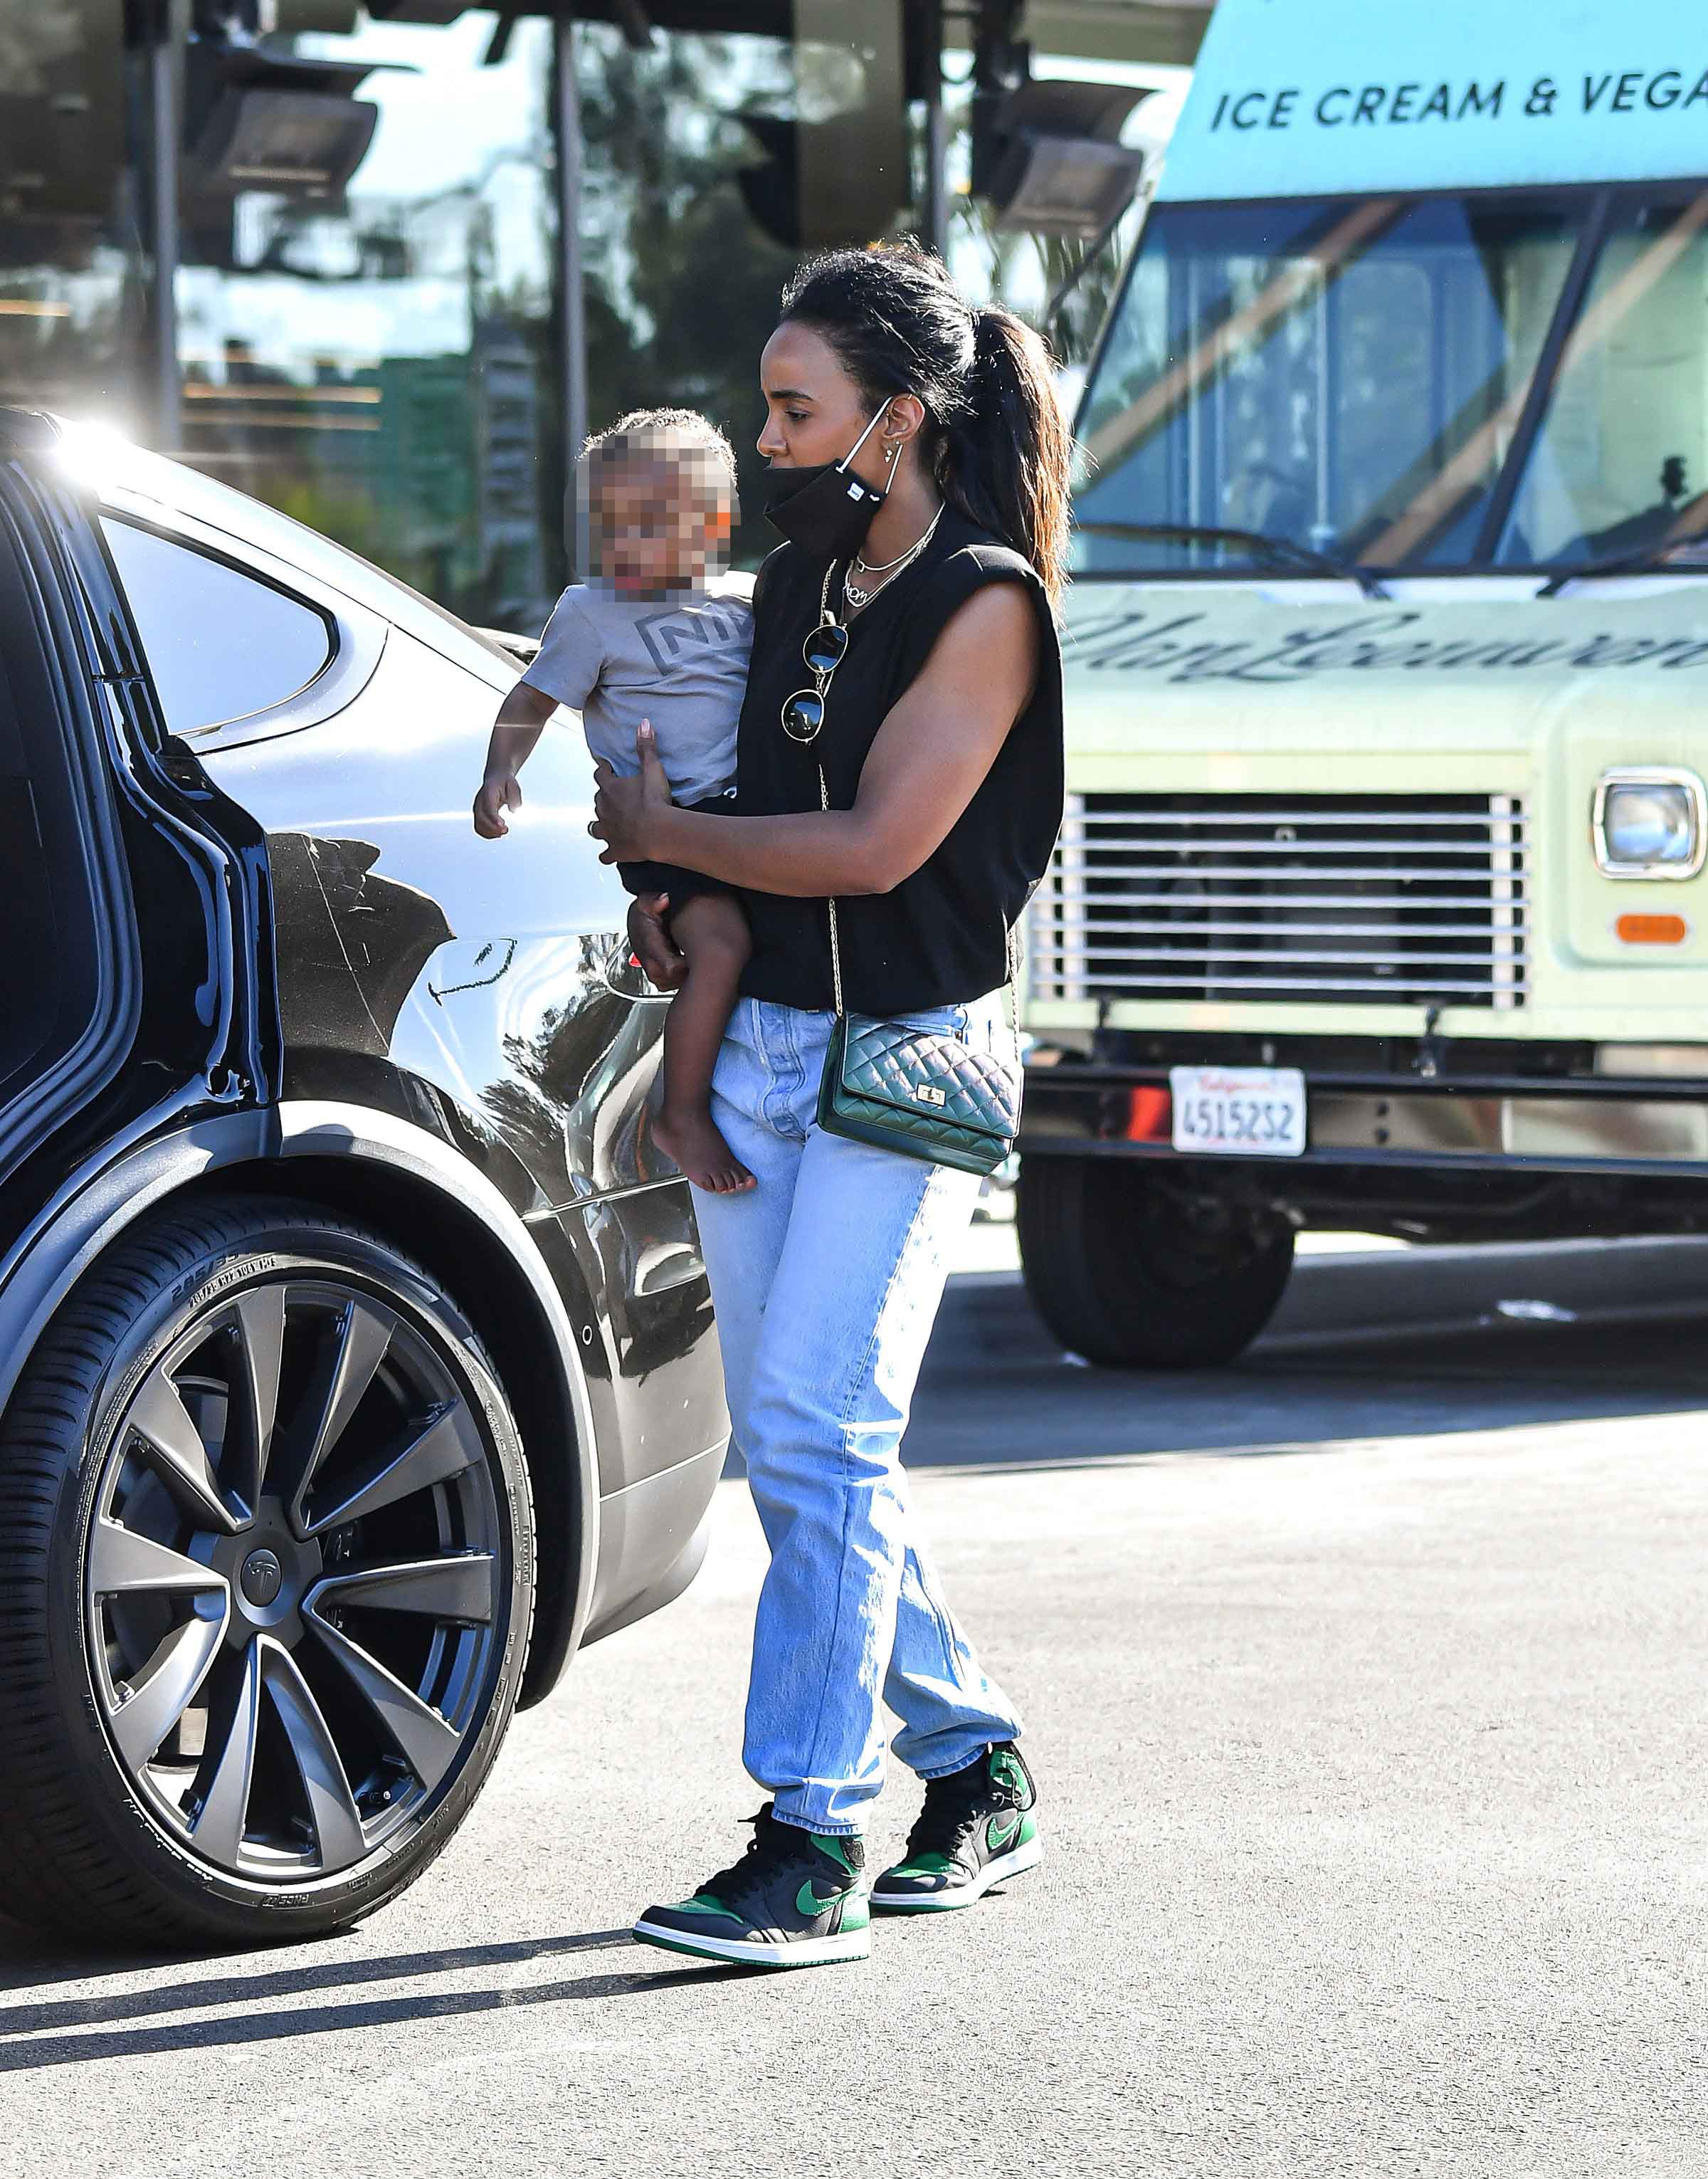 Kelly Rowland's Padded T-Shirt, Boyfriend Jeans and Air Jordans Celebrity Look for Less